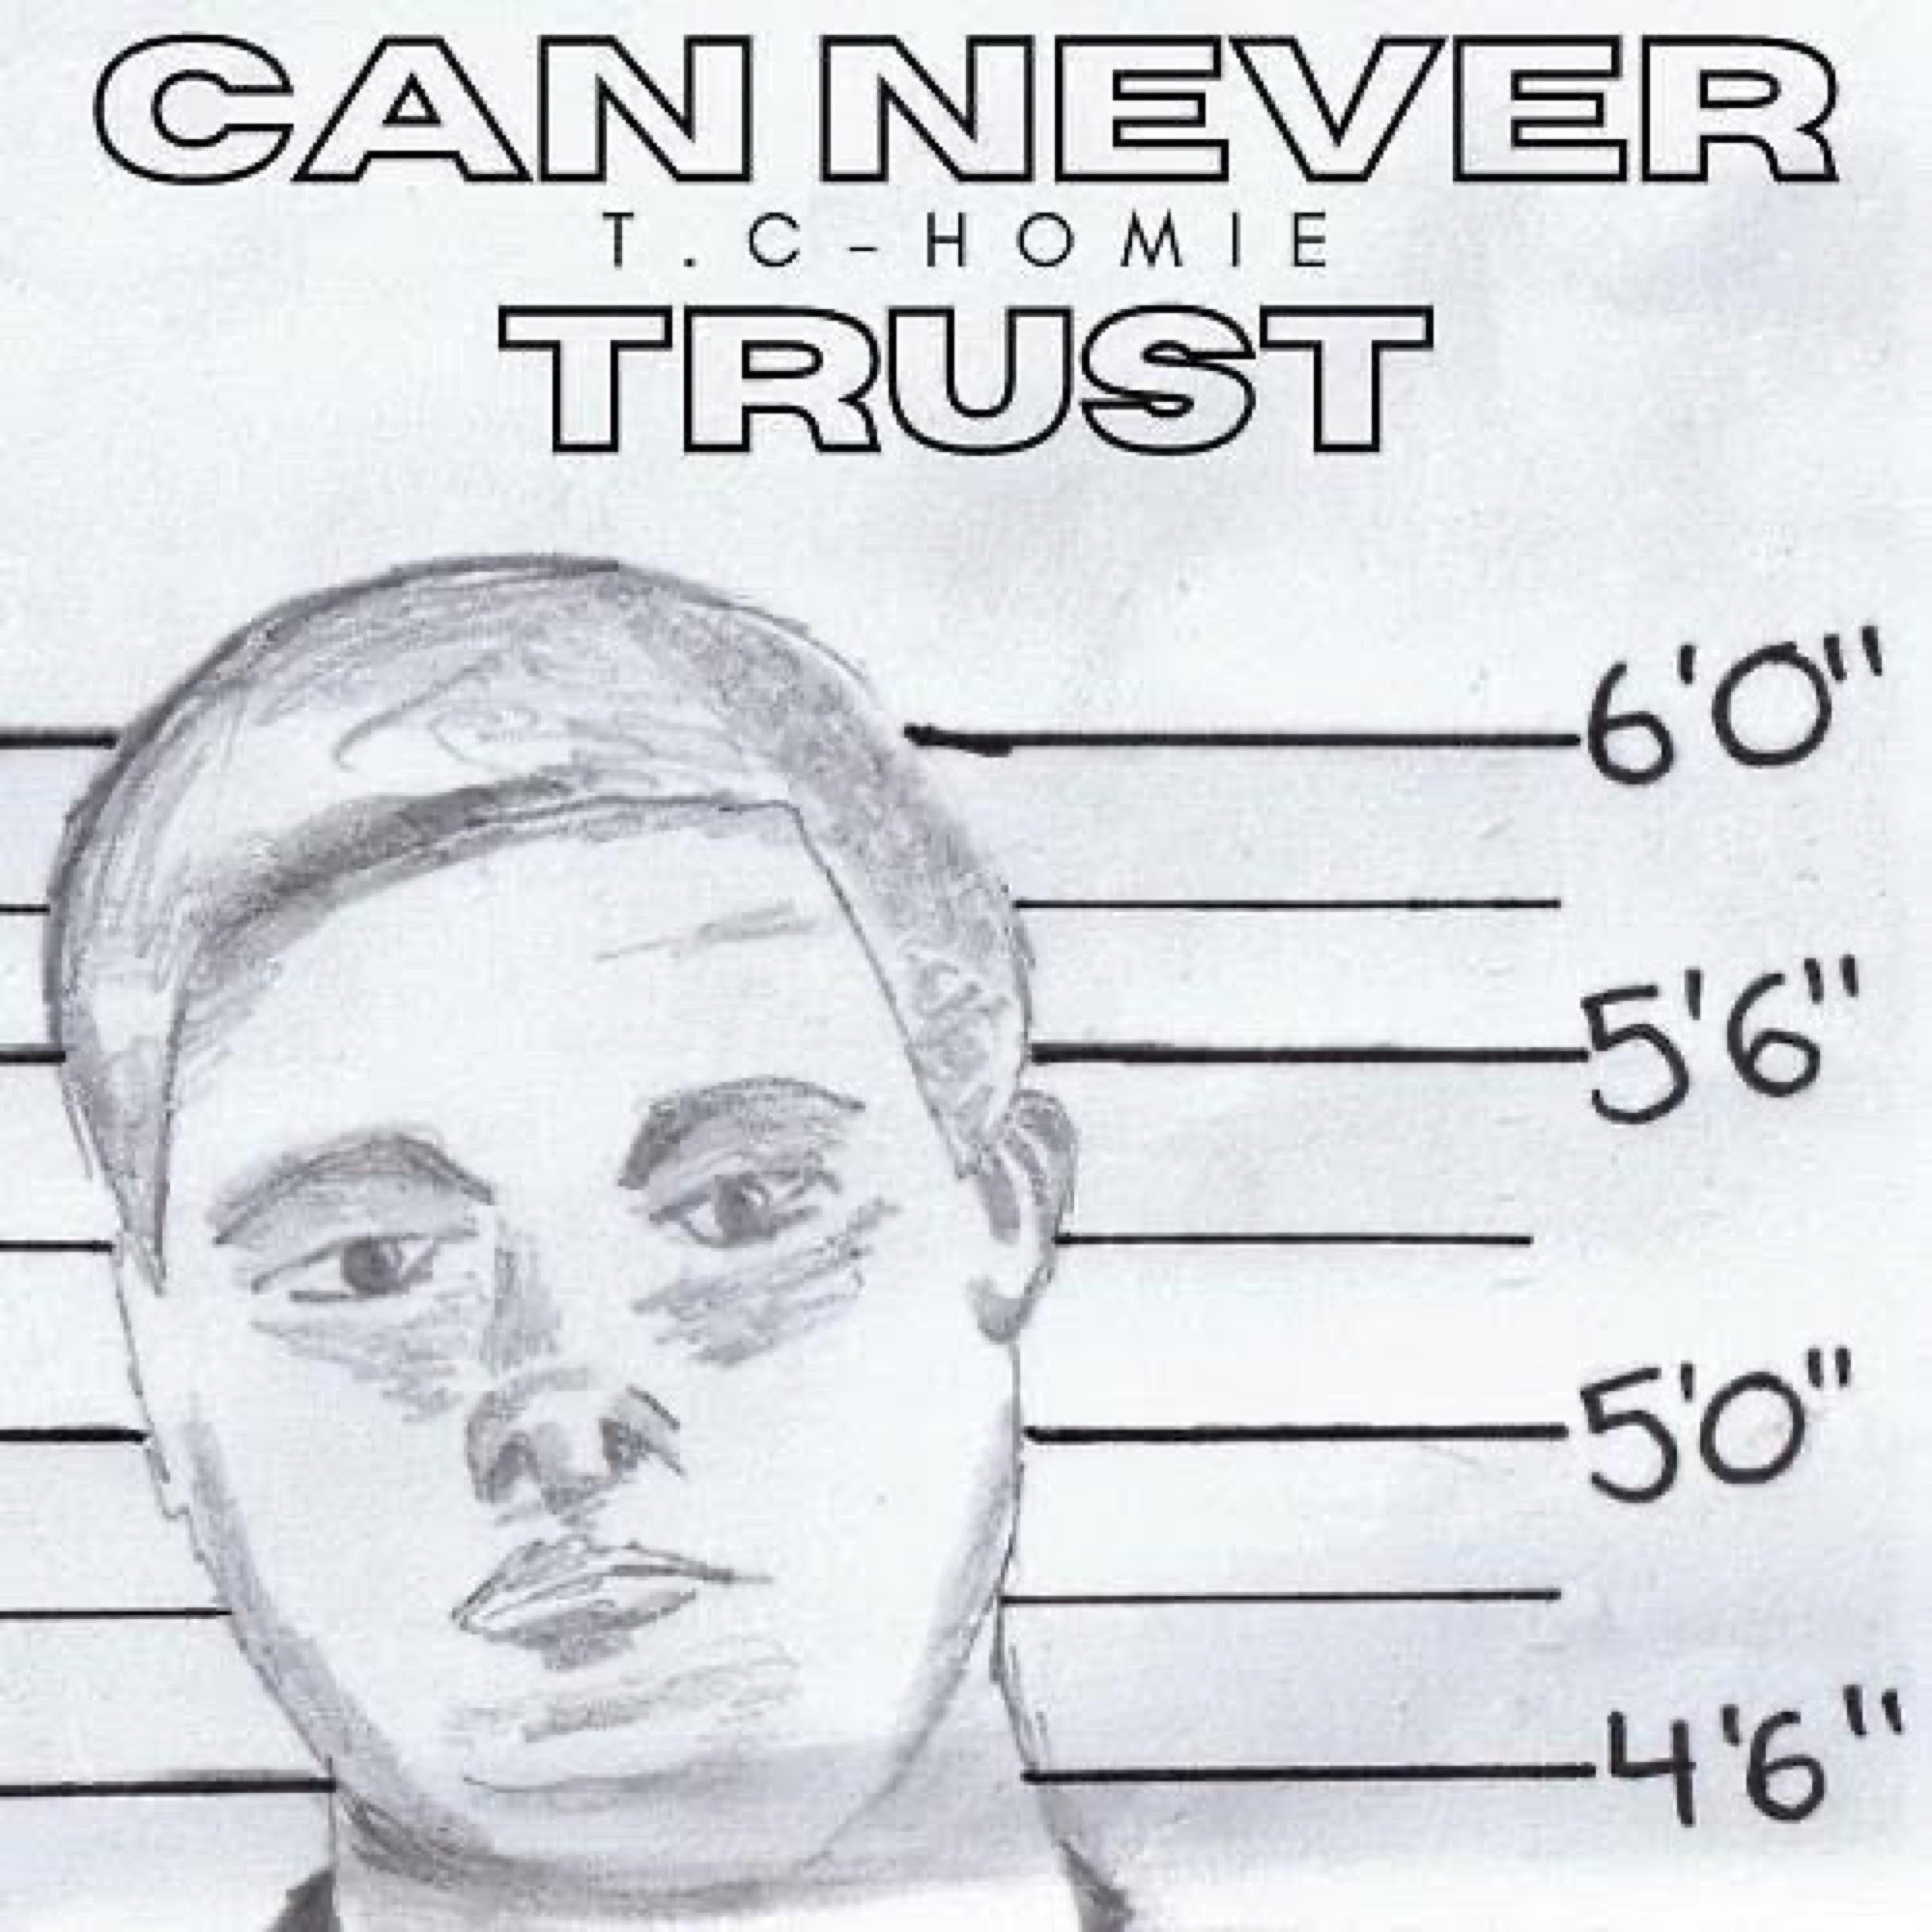 TC HOMIE - Can Never Trust (feat. Uncle Rick)